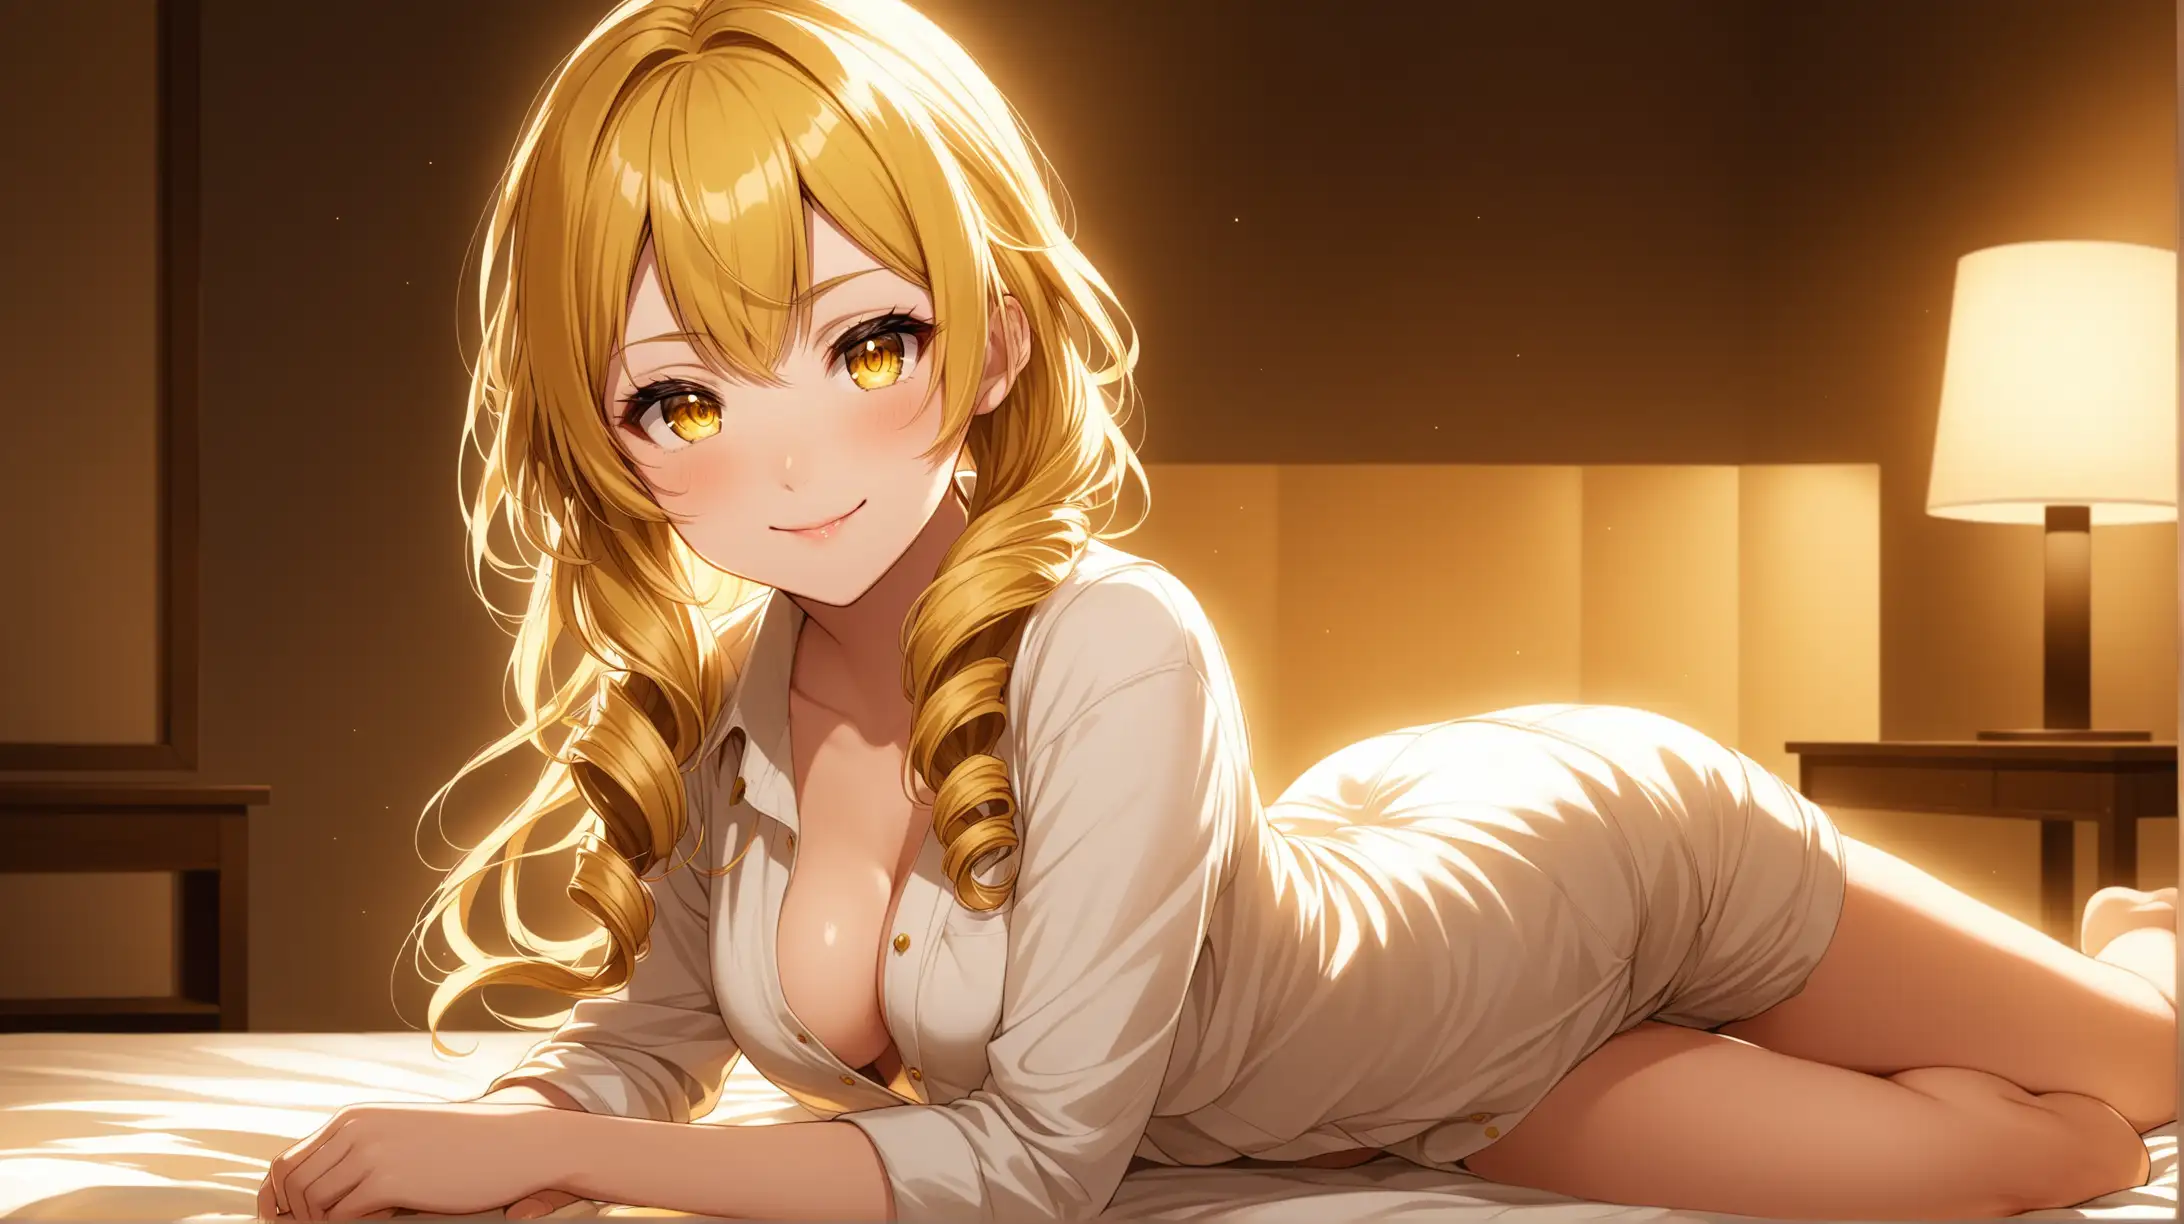 Blonde Anime Character Mami Tomoe Smiling Seductively in Ambient Lighting